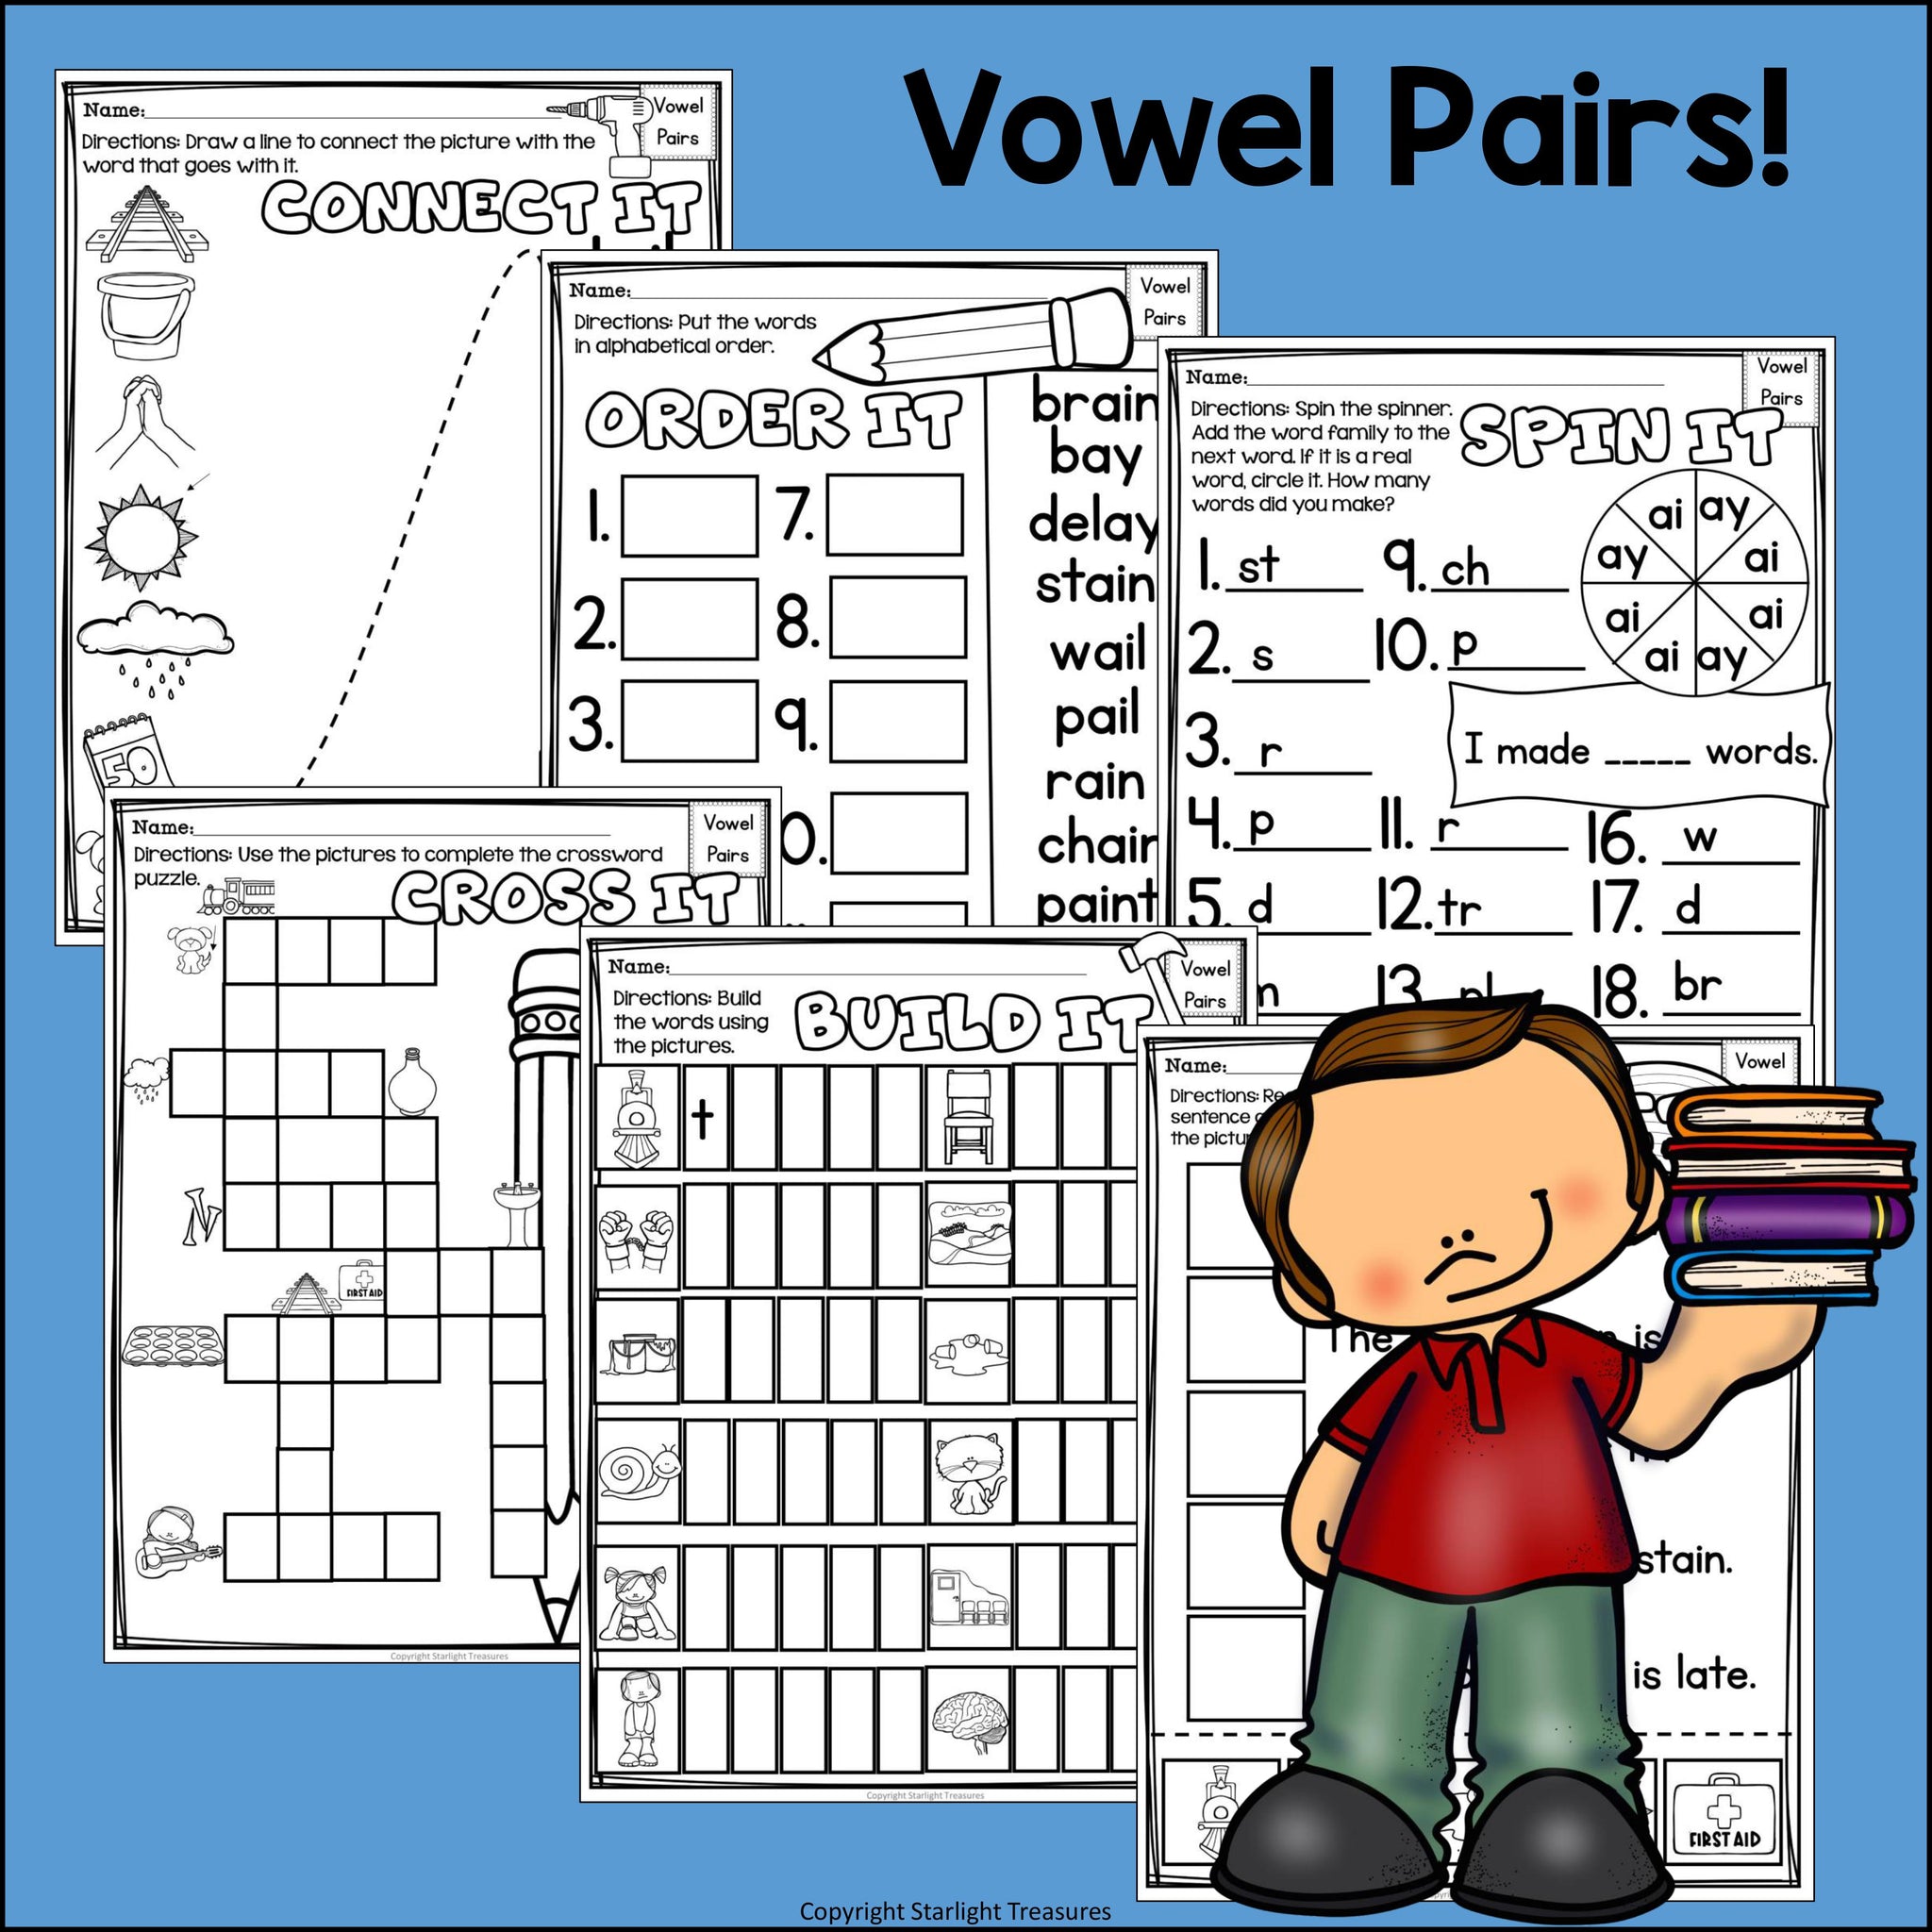 vowel-pairs-ai-ay-worksheets-and-activities-for-early-readers-phoni